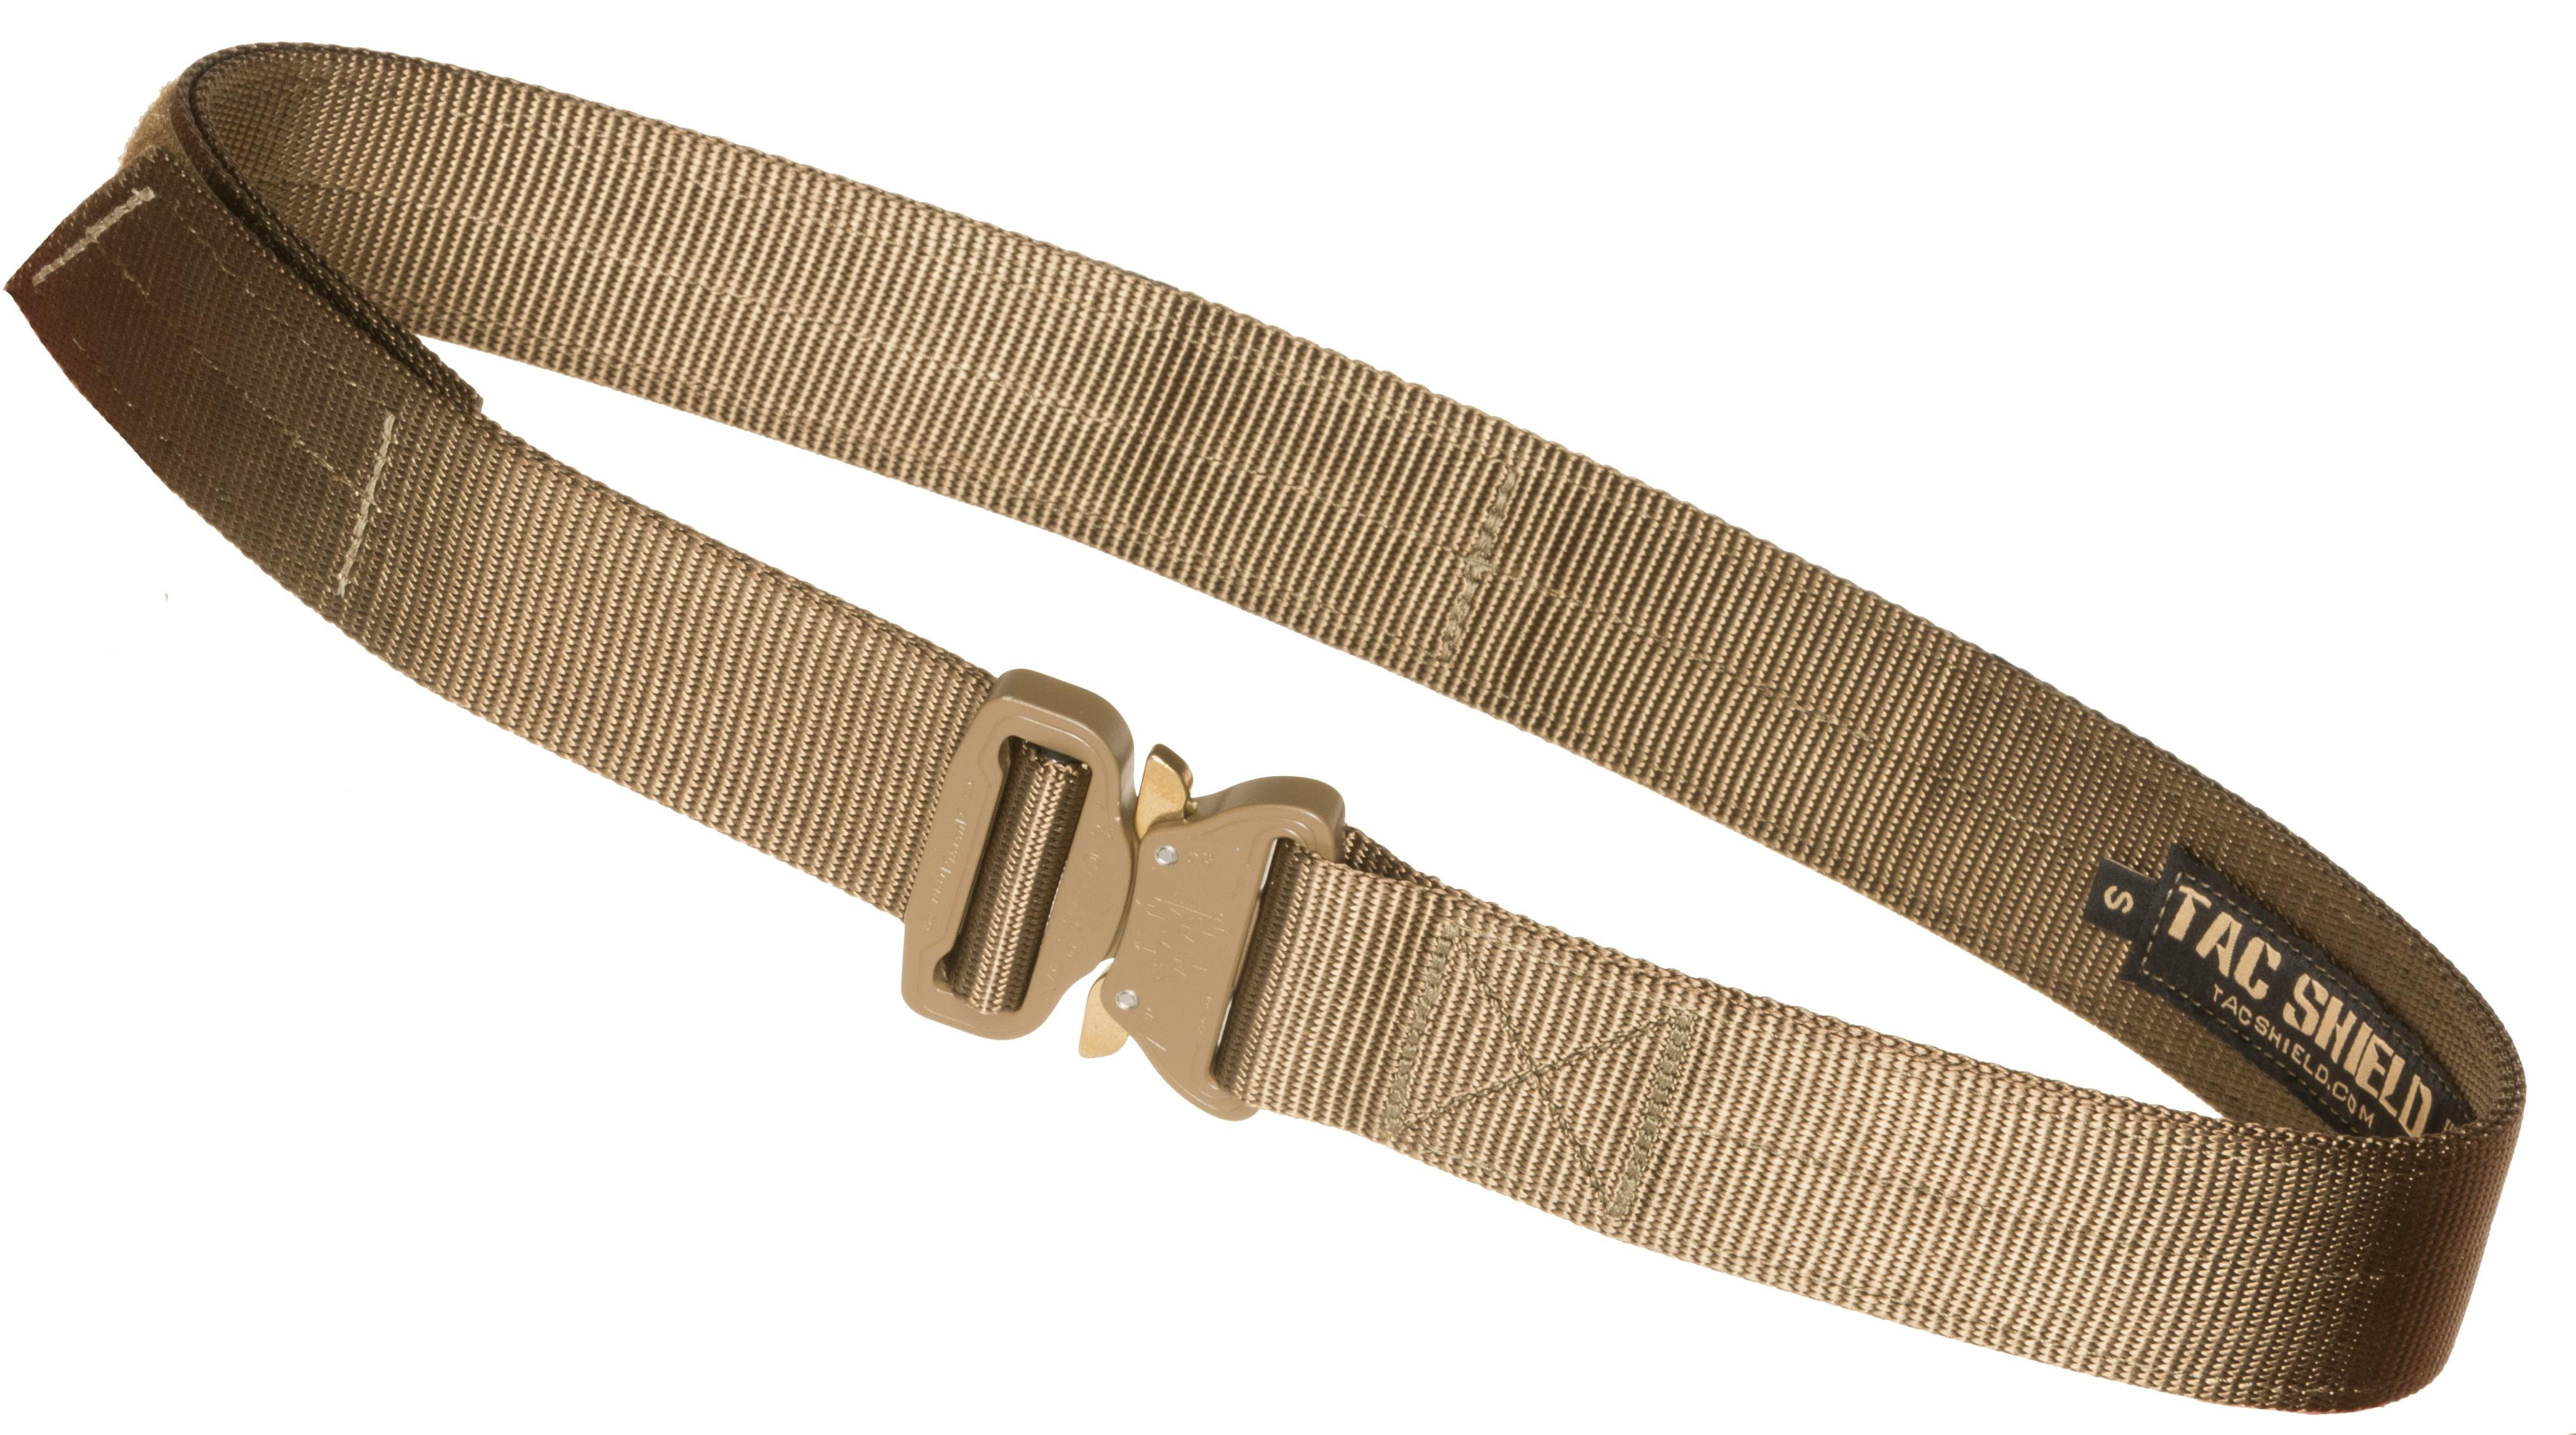 Tacshield Tactical Gun Belt - Width: 1.50", Size: 30" - 34", Color: Coyote-img-0